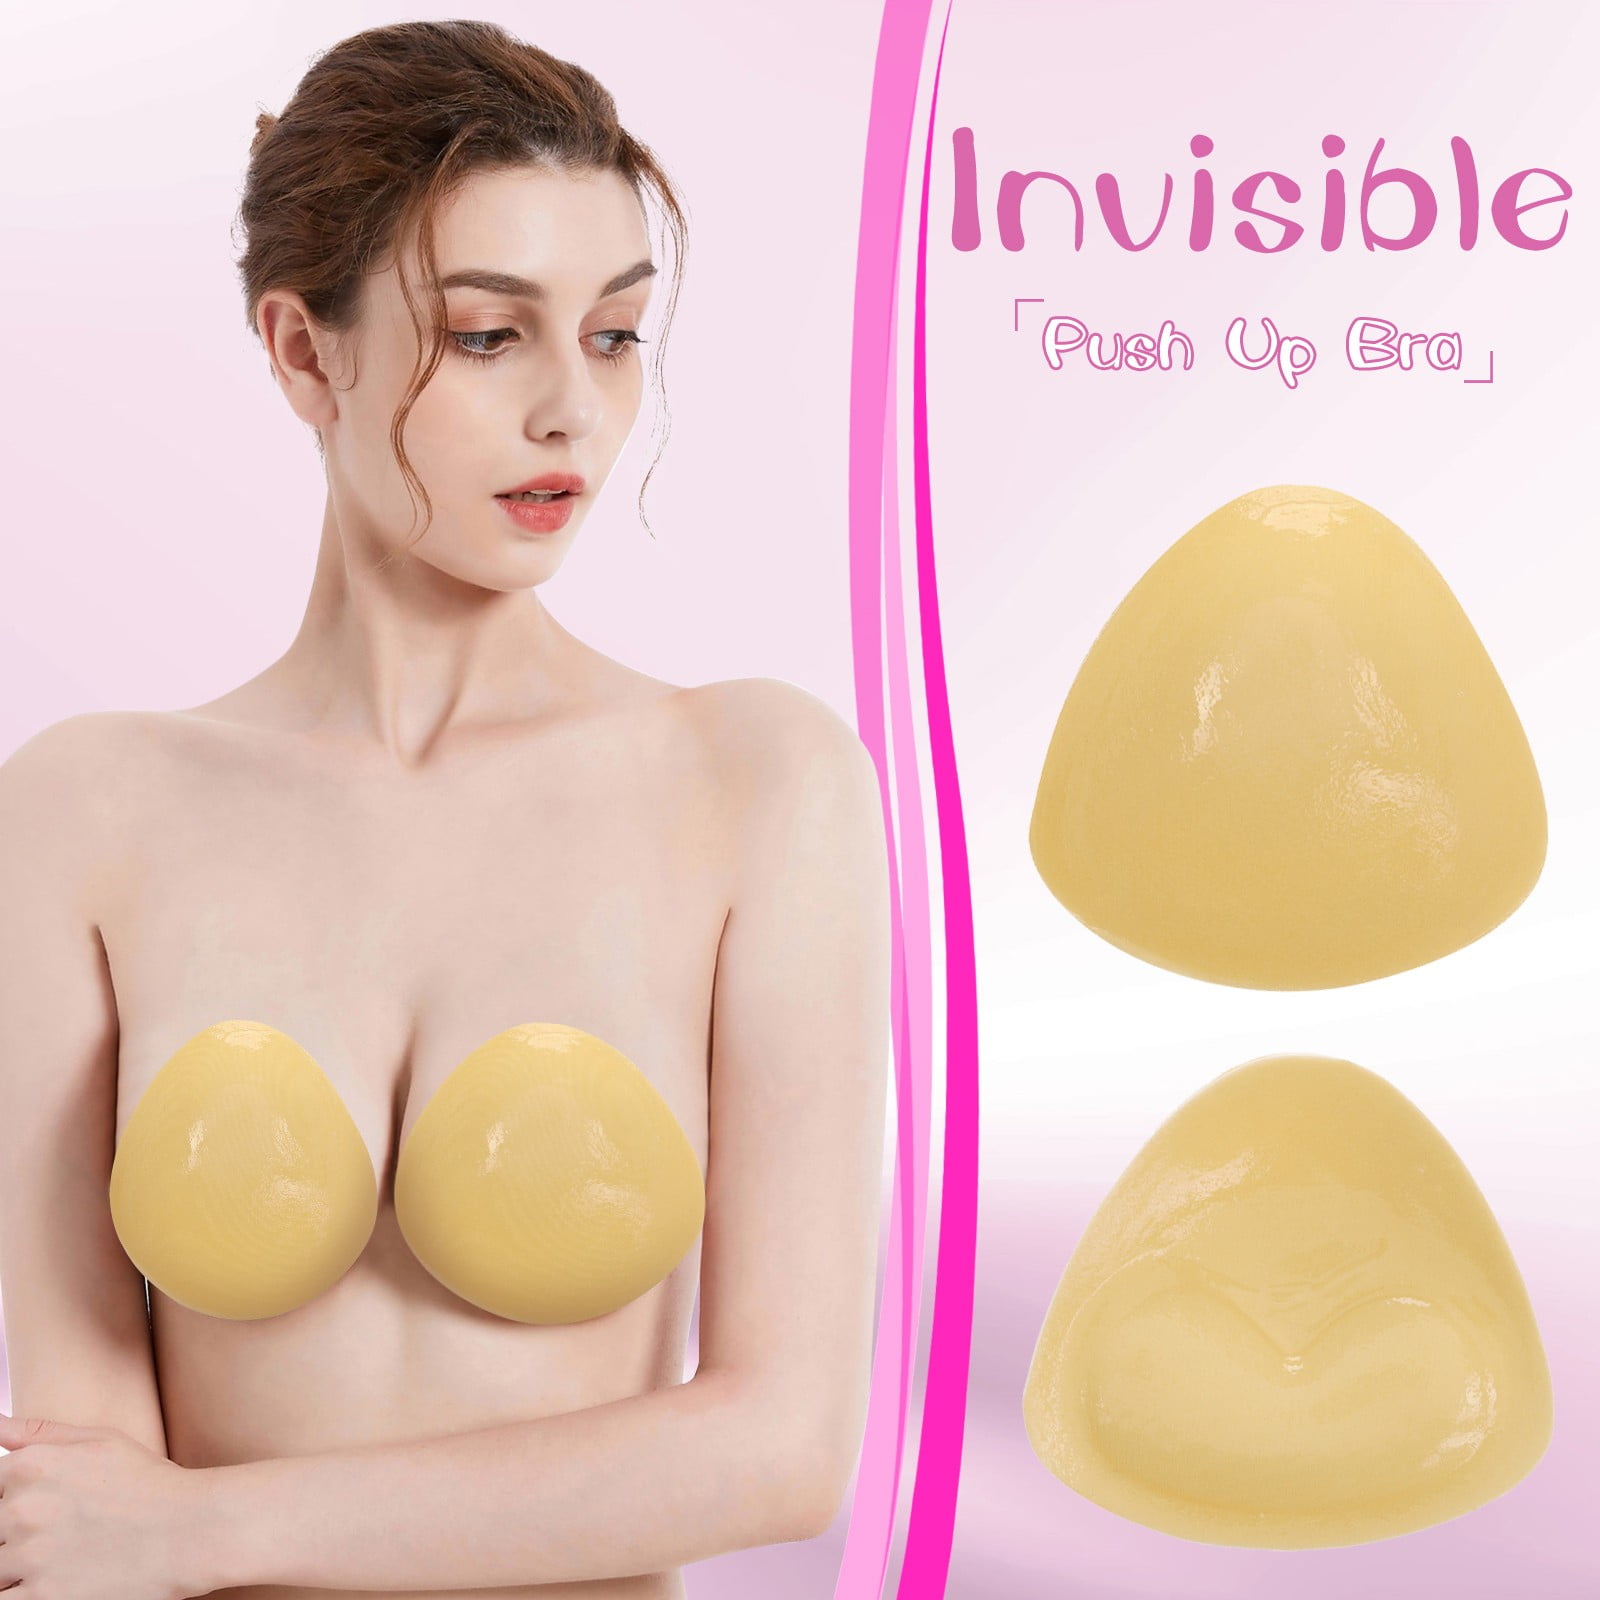 Conceal Lift Bra Invisilift Silicone Adhesive Lift Bras Adhesive